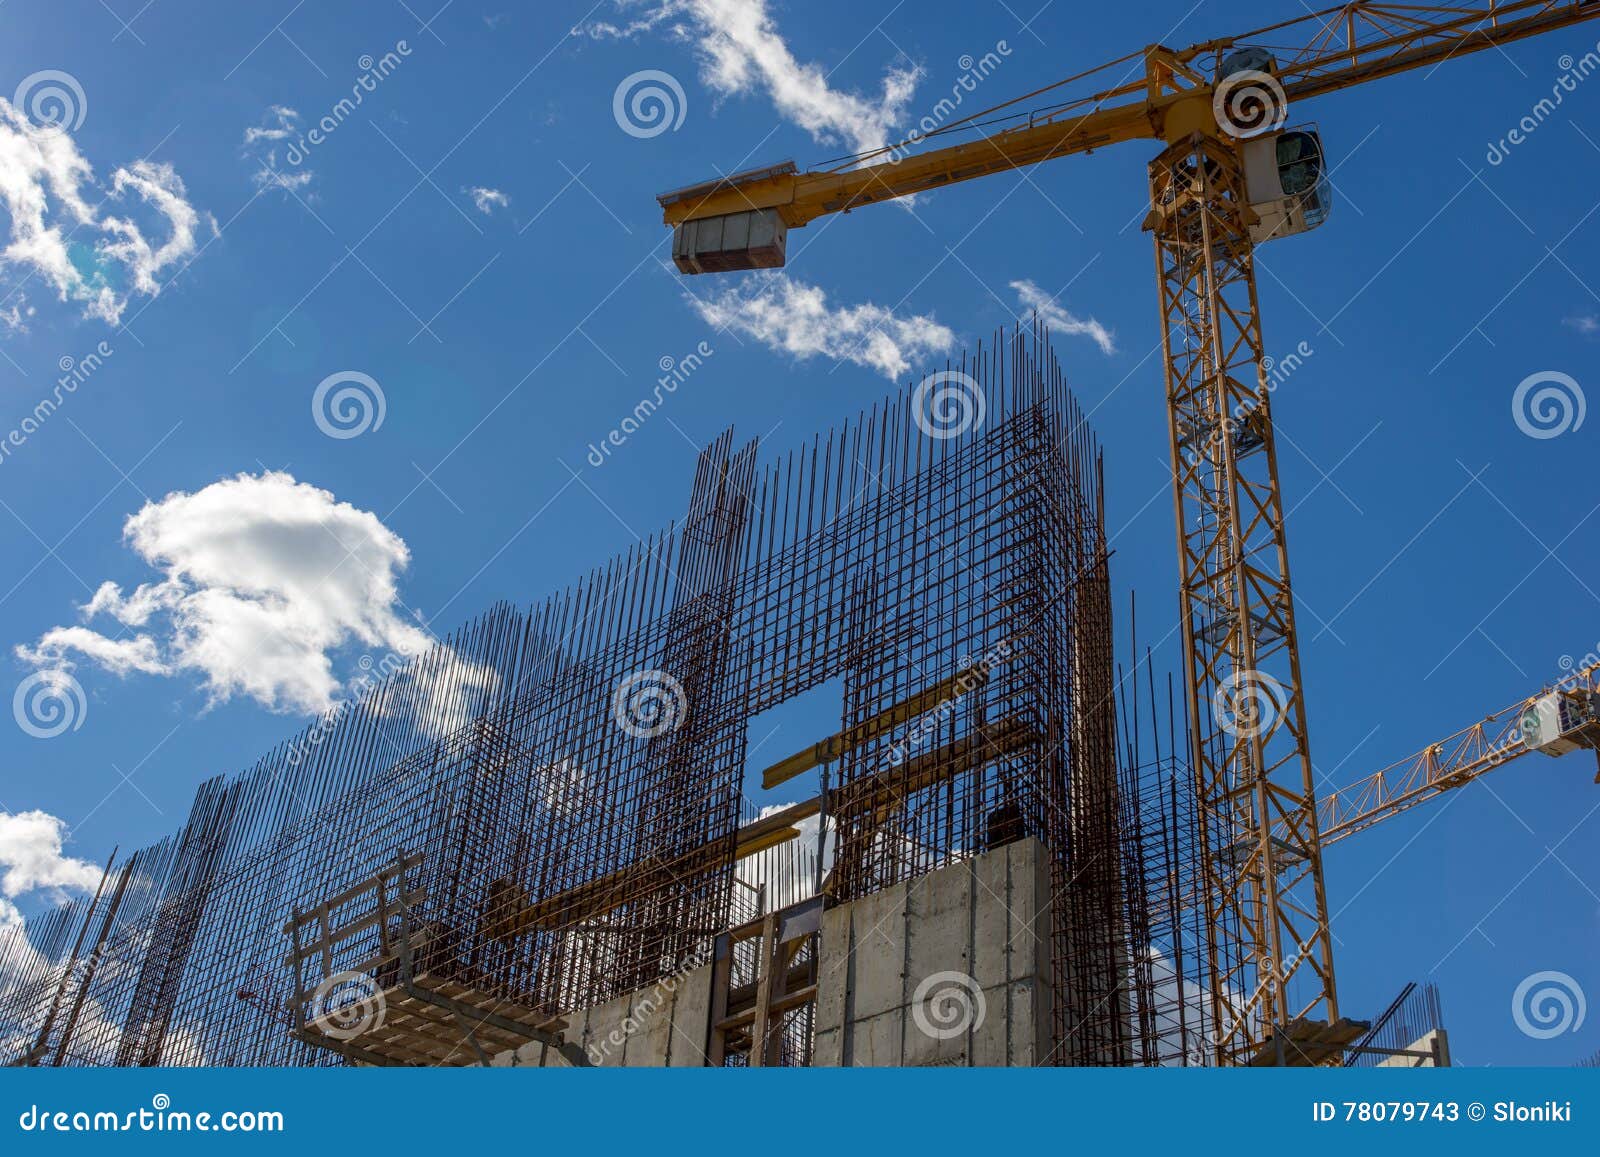 Concrete Construction Site of New Building Stock Image - Image of